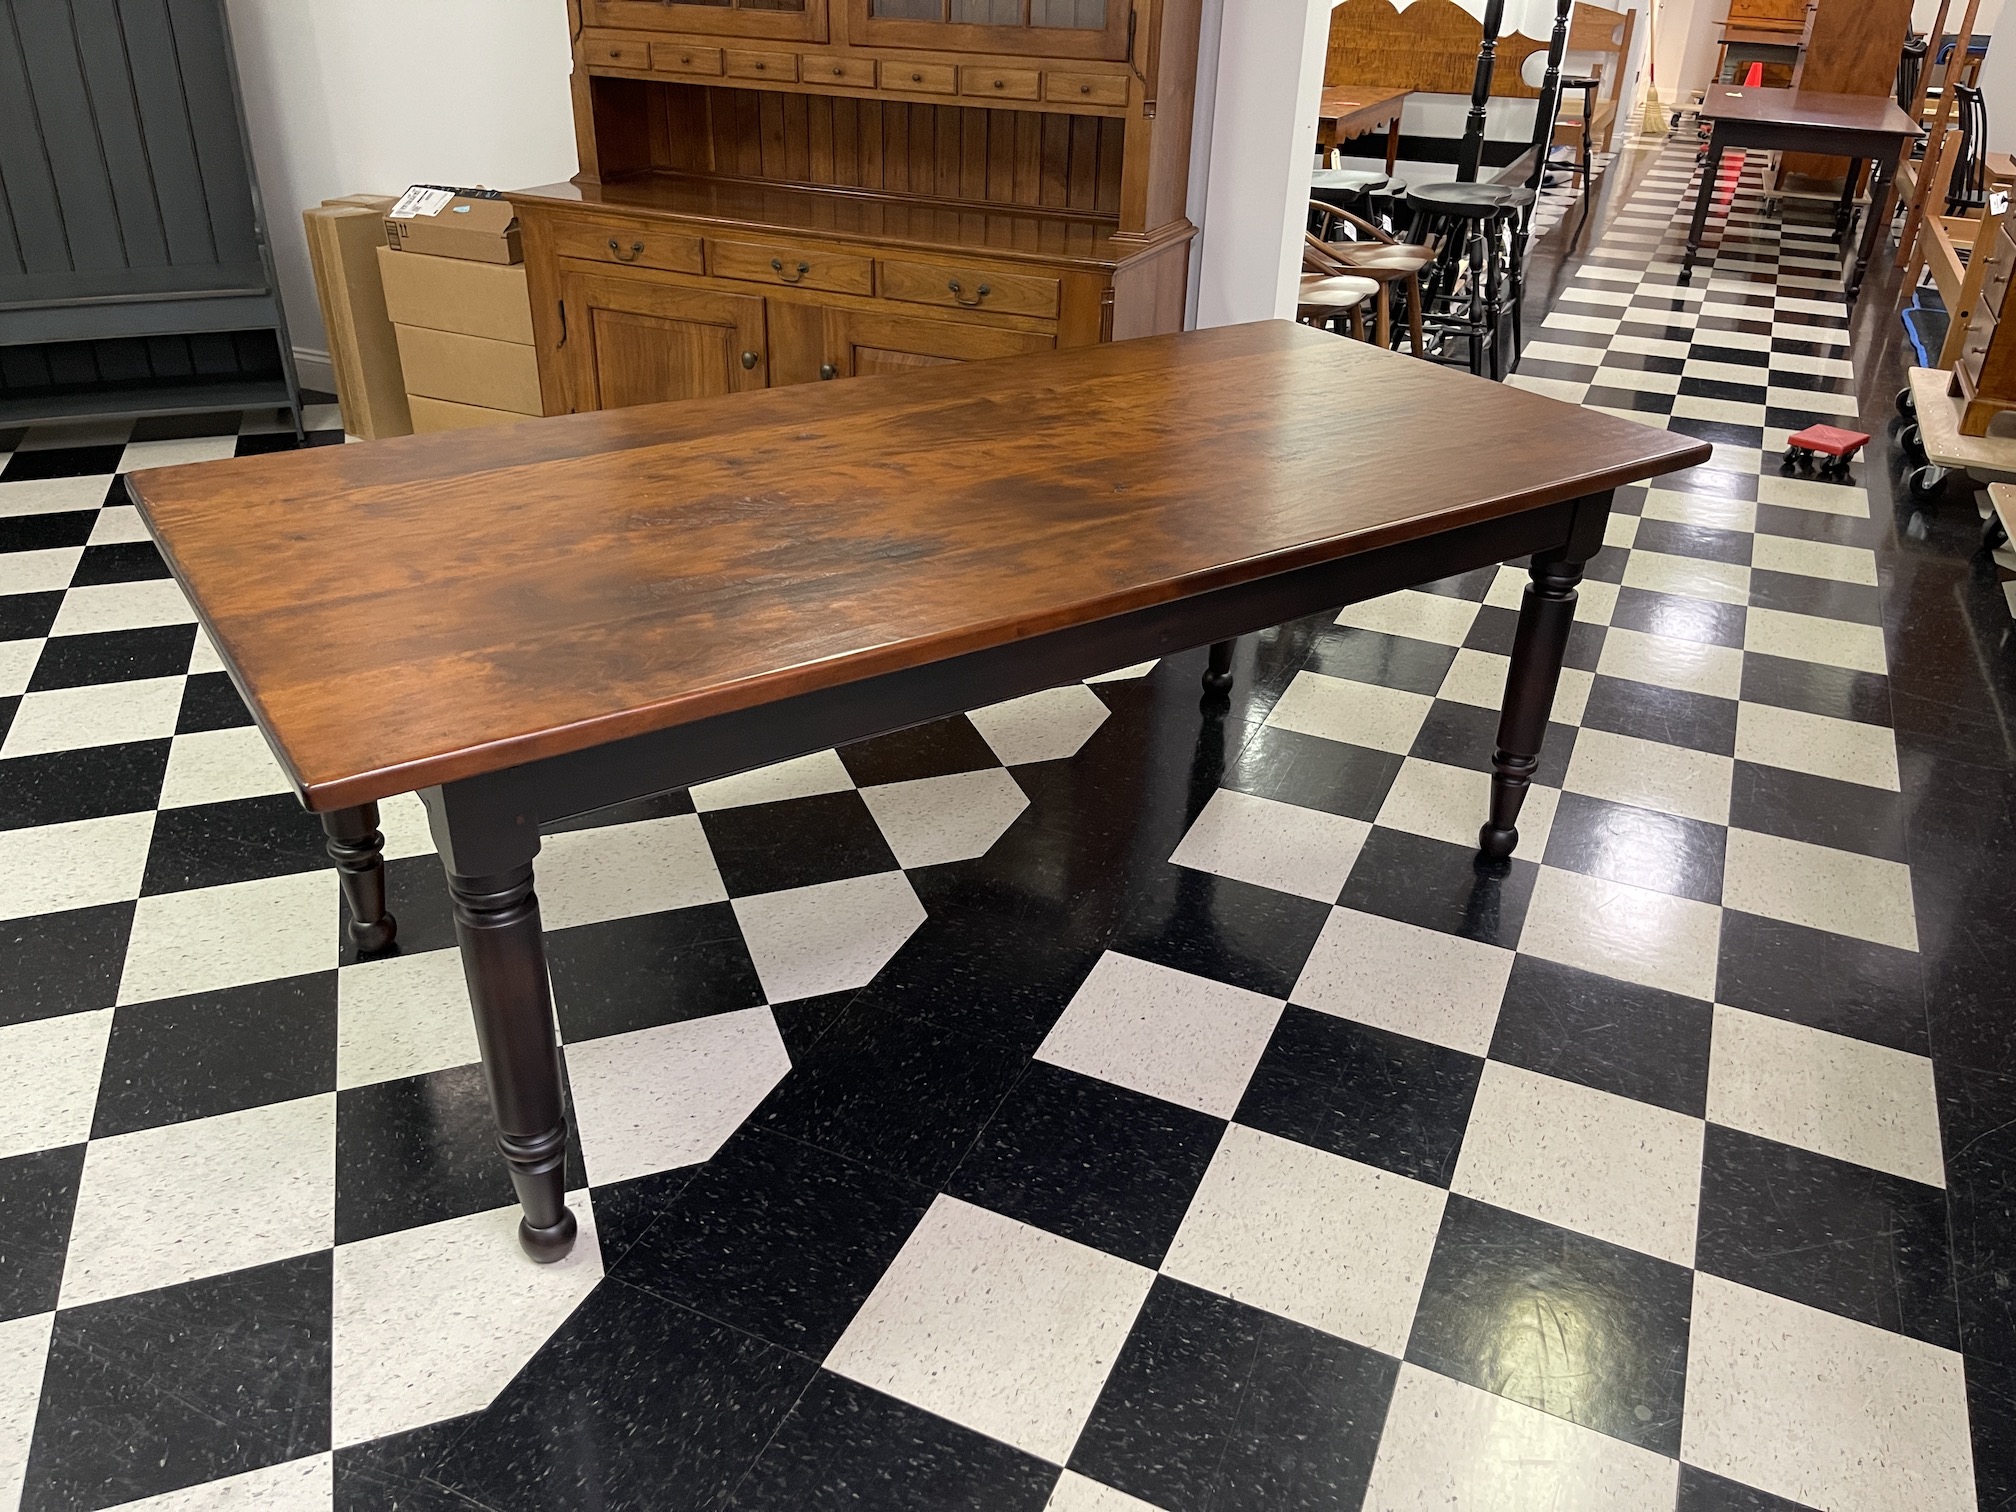 7ft X 39 3/4in Gettysburg Farmhouse Table - Cherry Wood Top - Painted Base Image